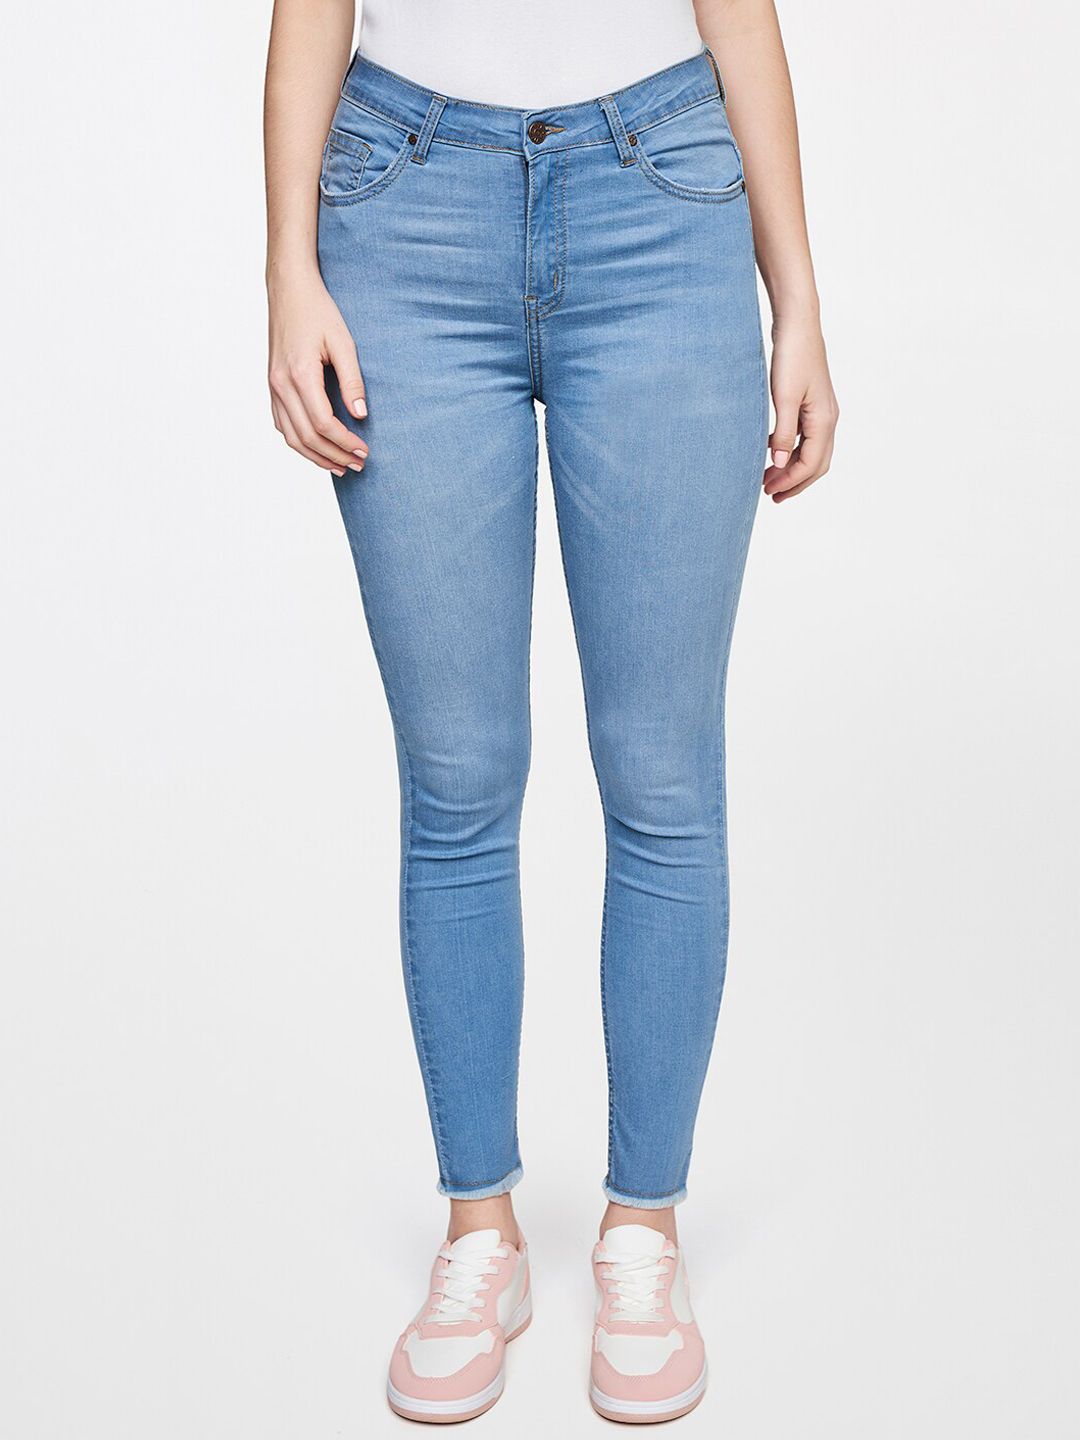 AND Women Blue Slim Fit Stretchable Jeans Price in India